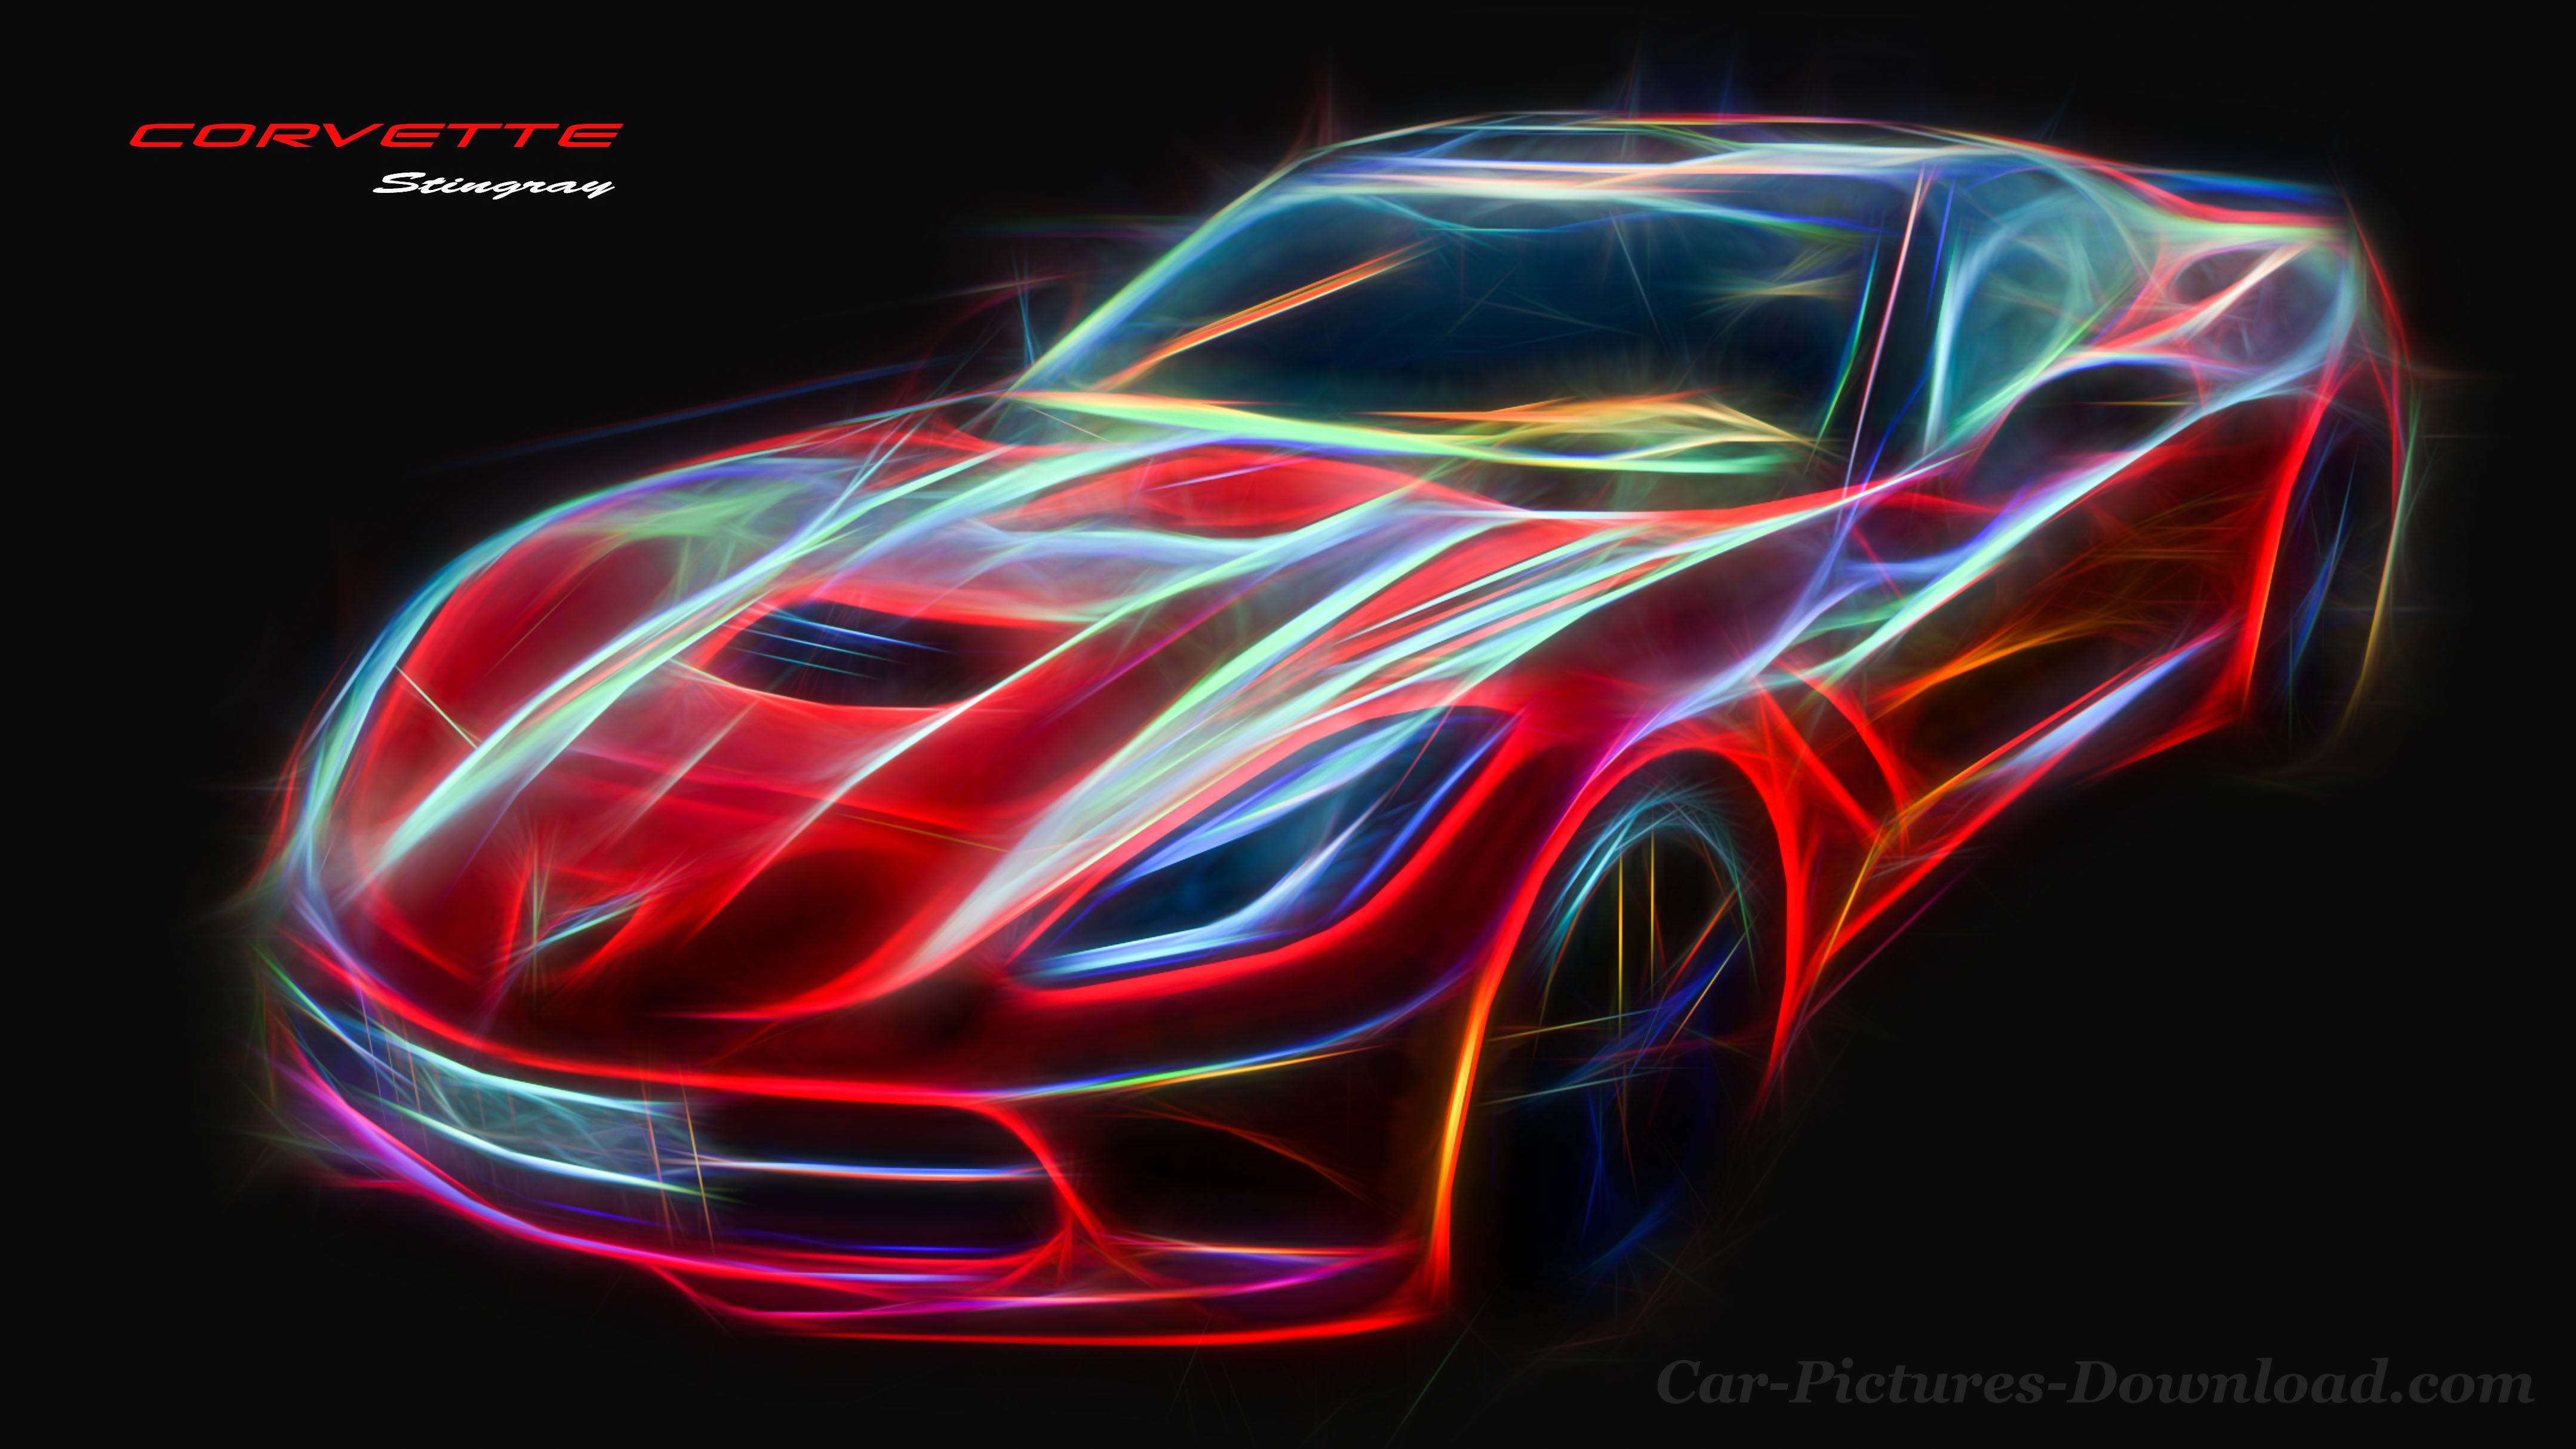 Corvette Wallpaper For All Devices Best Quality And To